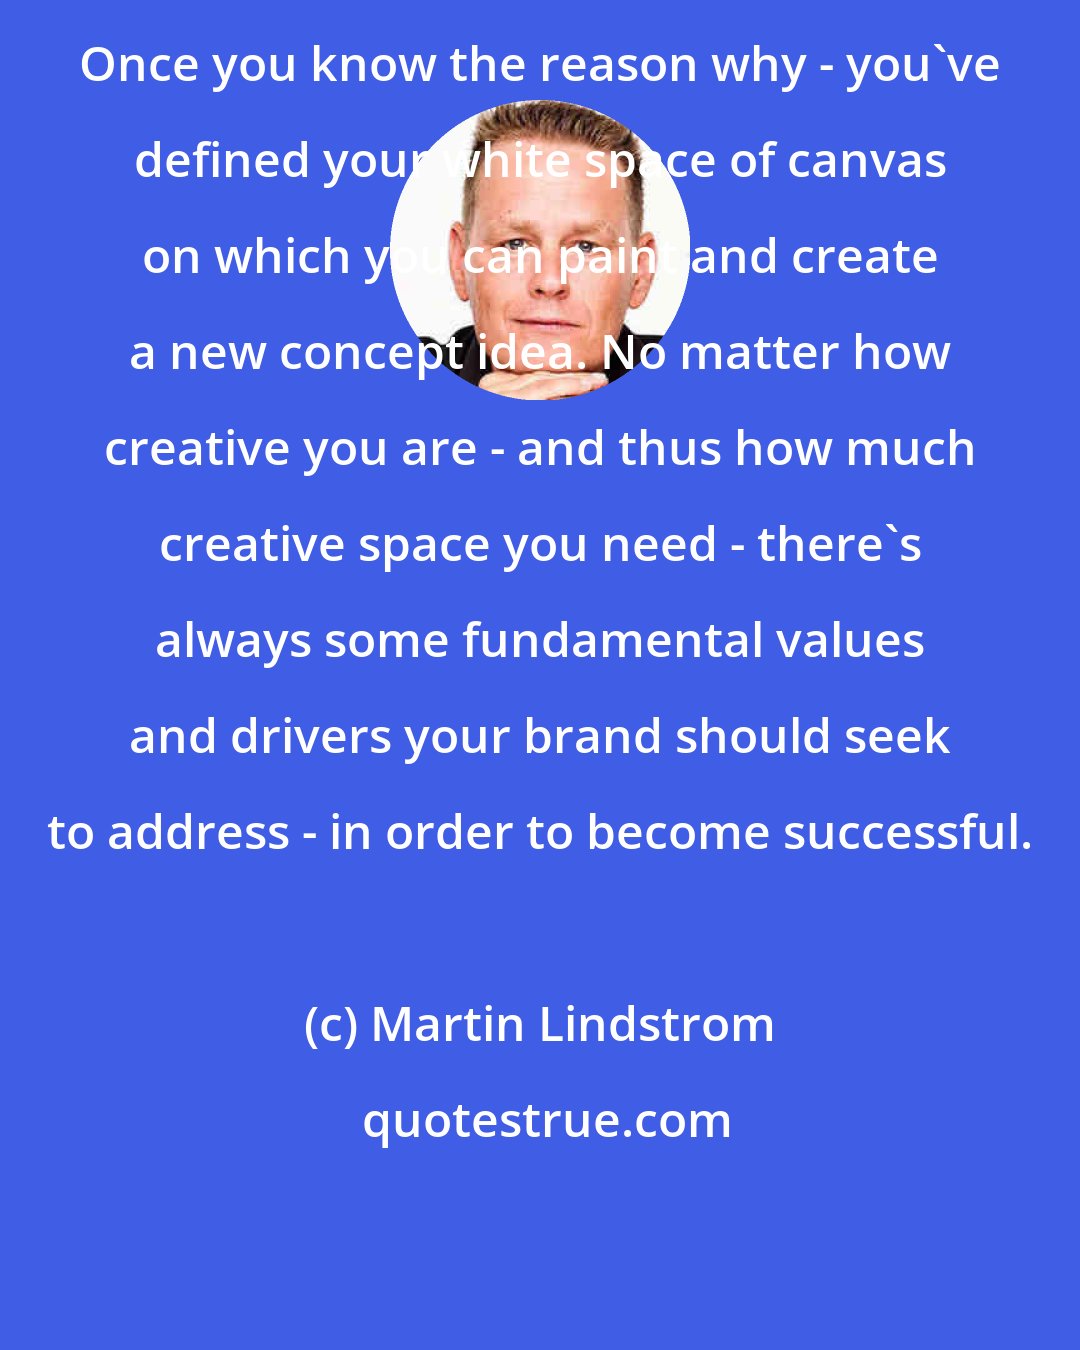 Martin Lindstrom: Once you know the reason why - you've defined your white space of canvas on which you can paint and create a new concept idea. No matter how creative you are - and thus how much creative space you need - there's always some fundamental values and drivers your brand should seek to address - in order to become successful.